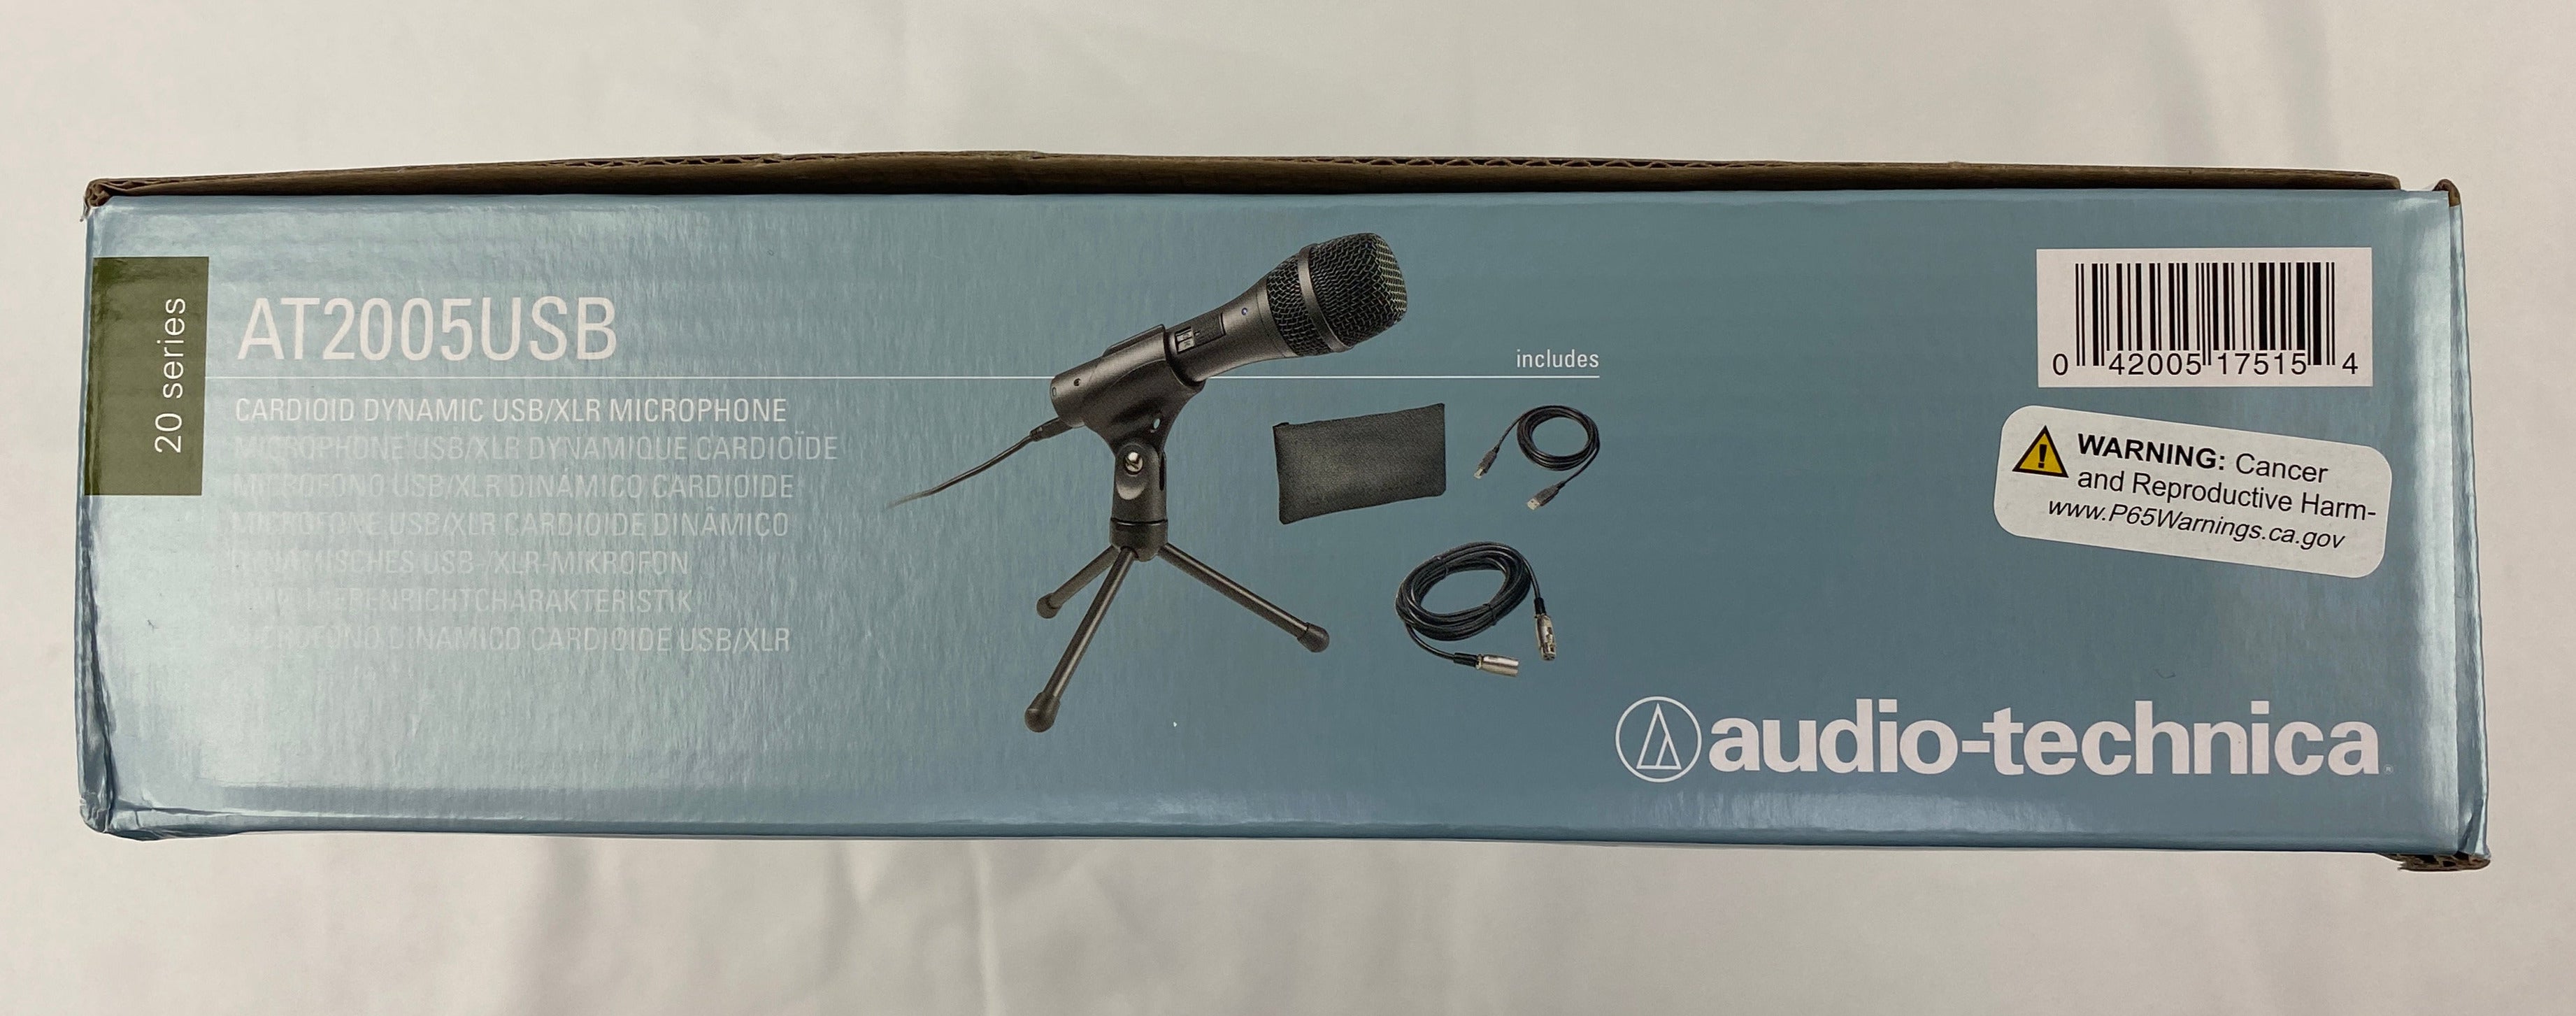 Audio Technica AT2005USB Dynamic Wired Microphone for Recording and Podcasting